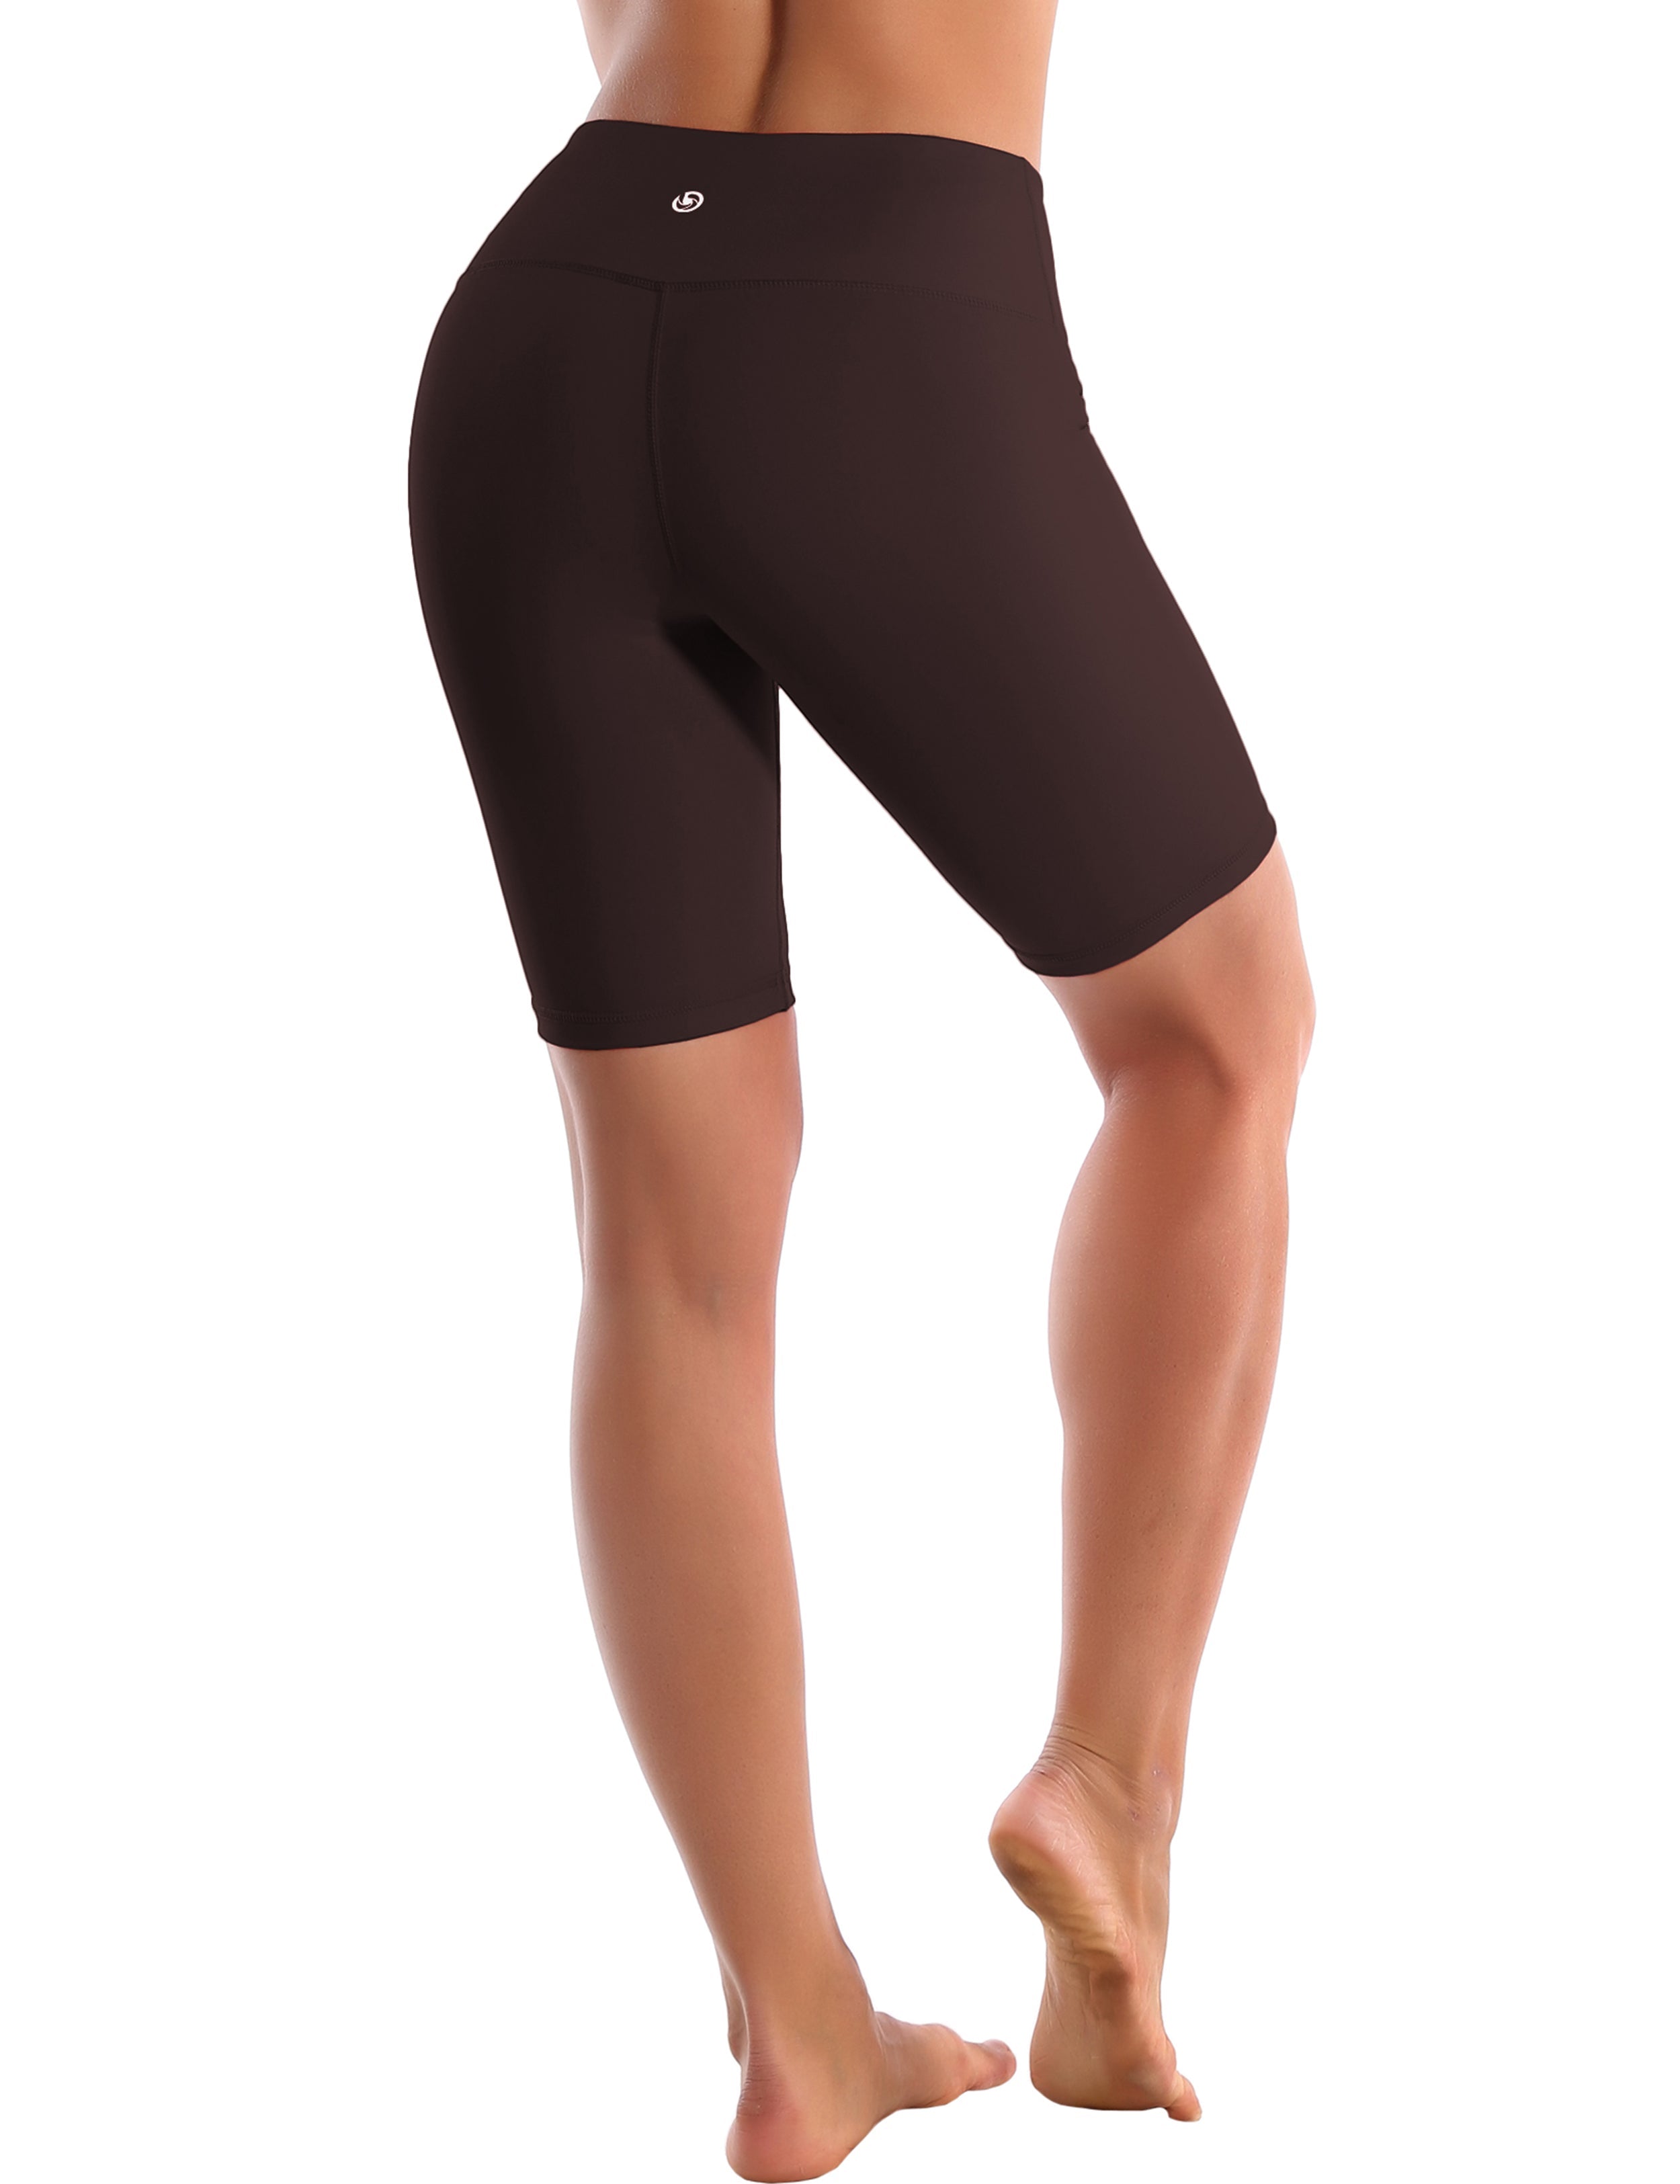 8" High Waist Biking Shorts mahoganymaroon Sleek, soft, smooth and totally comfortable: our newest style is here. Softest-ever fabric High elasticity High density 4-way stretch Fabric doesn't attract lint easily No see-through Moisture-wicking Machine wash 75% Nylon, 25% Spandex